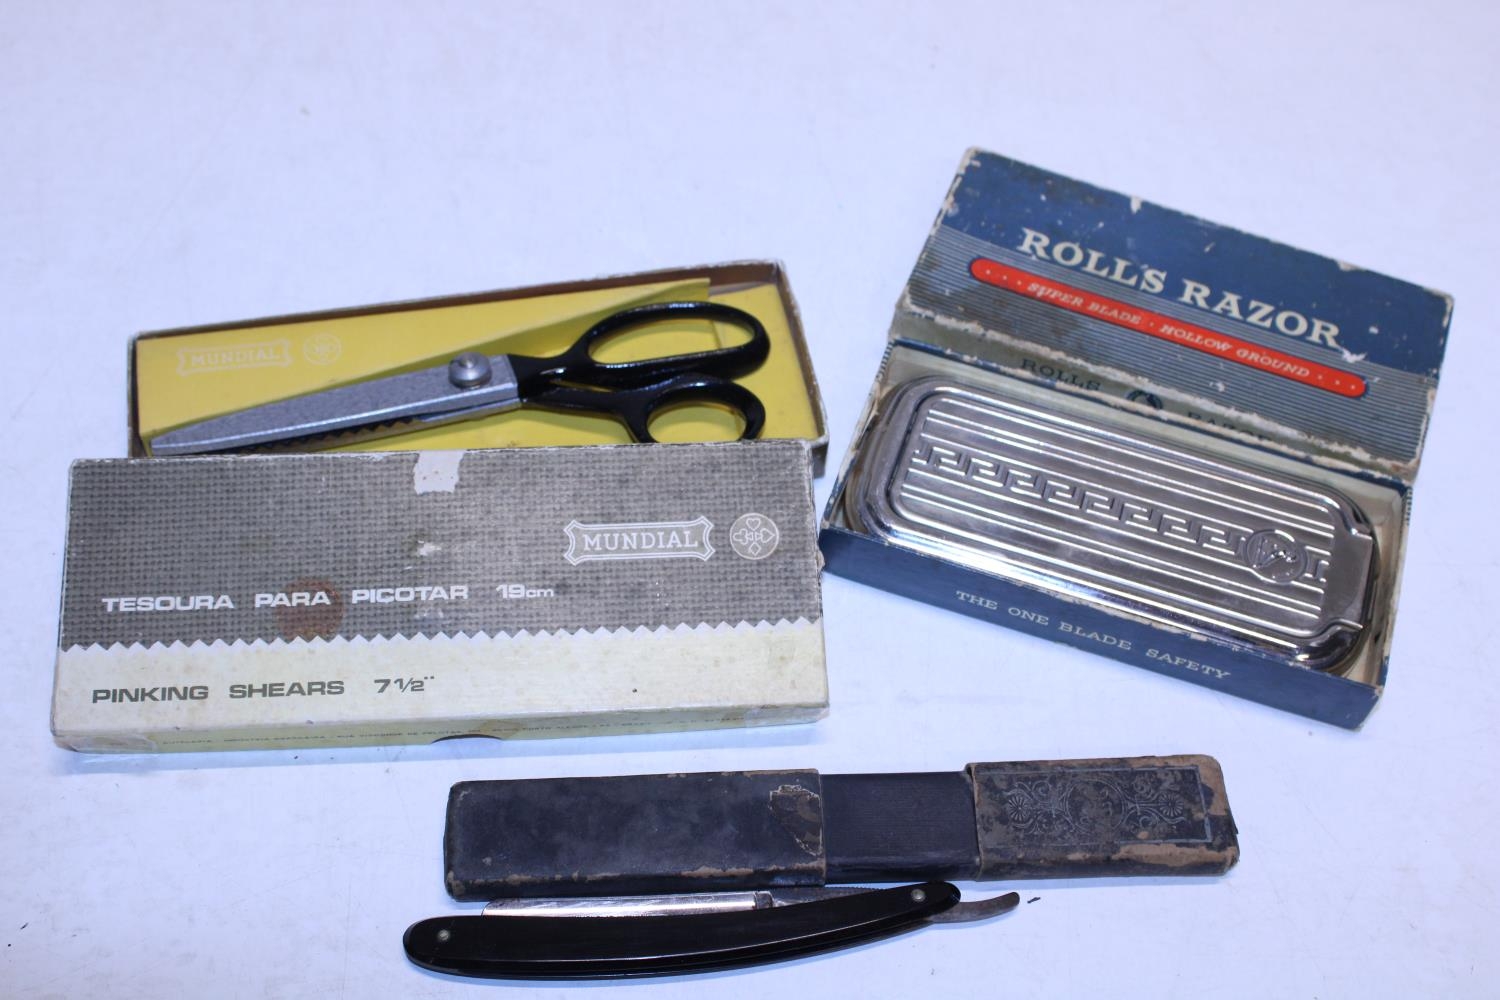 Two vintage razors including a Rolls razor and pinking shears